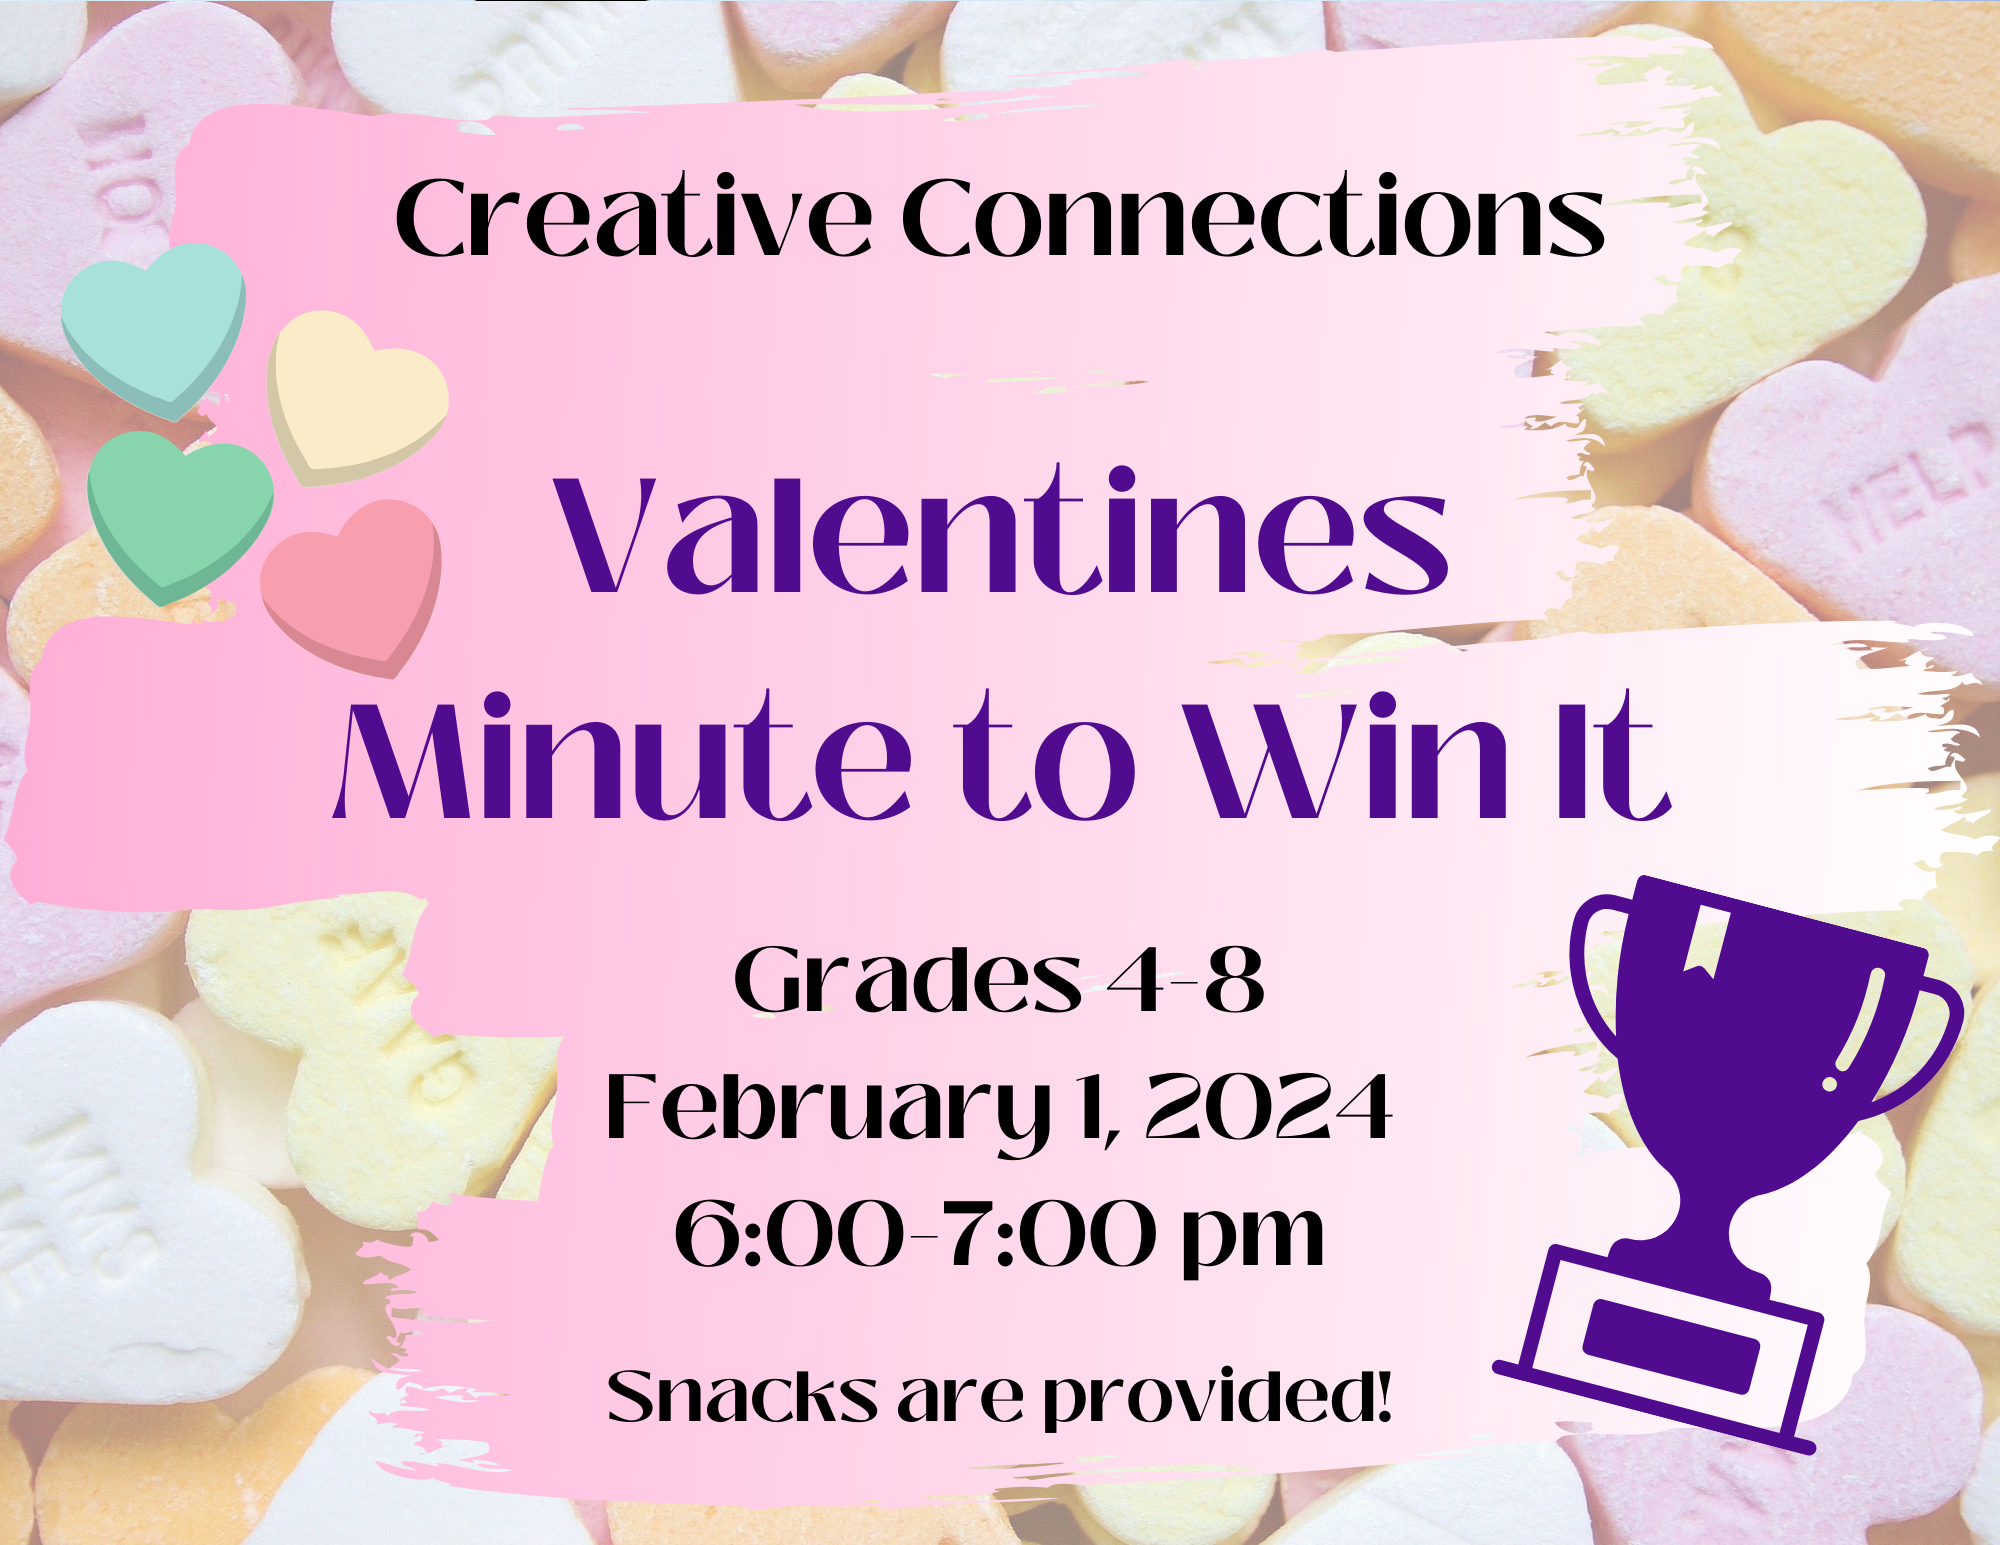 Creative Connections Valentine's Minute to Win It Grades 4 to 8 February 1 2024 6 to 7 pm snacks are provided!